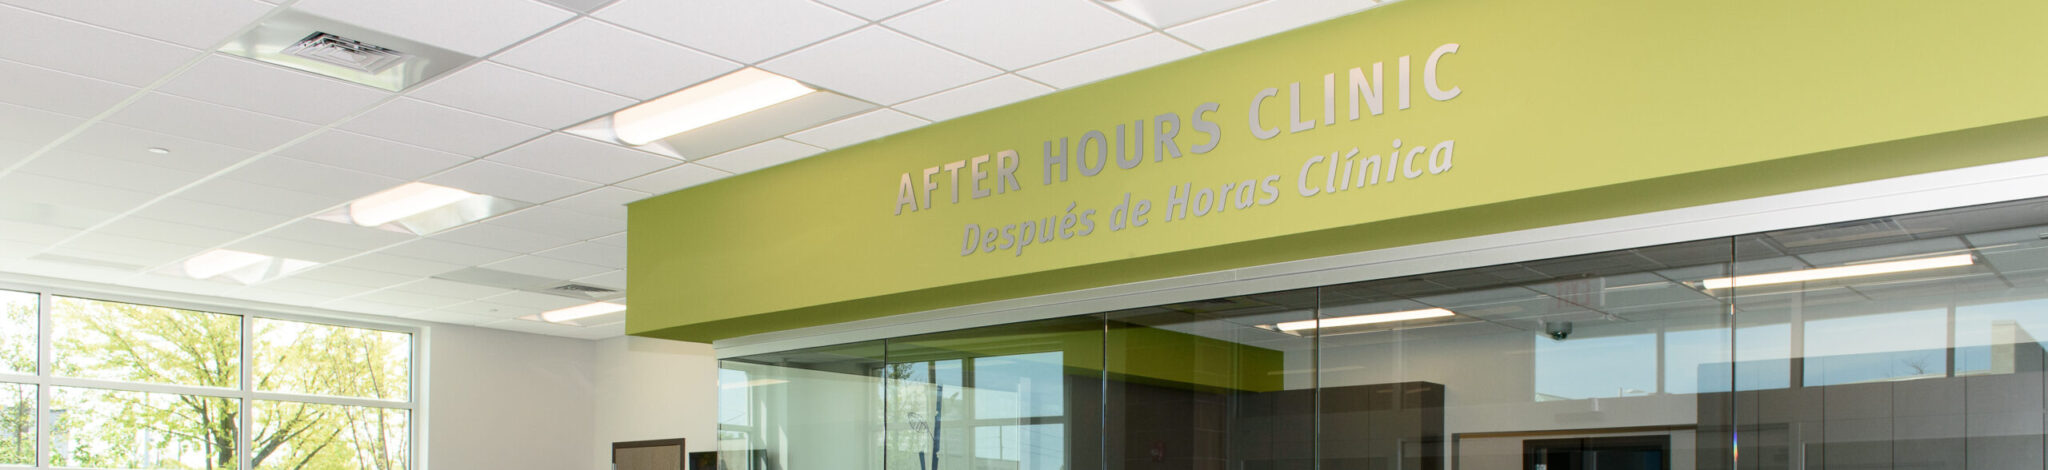 Lobby of the After Hours Clinic at Nexus Health Care in Toledo, Ohio